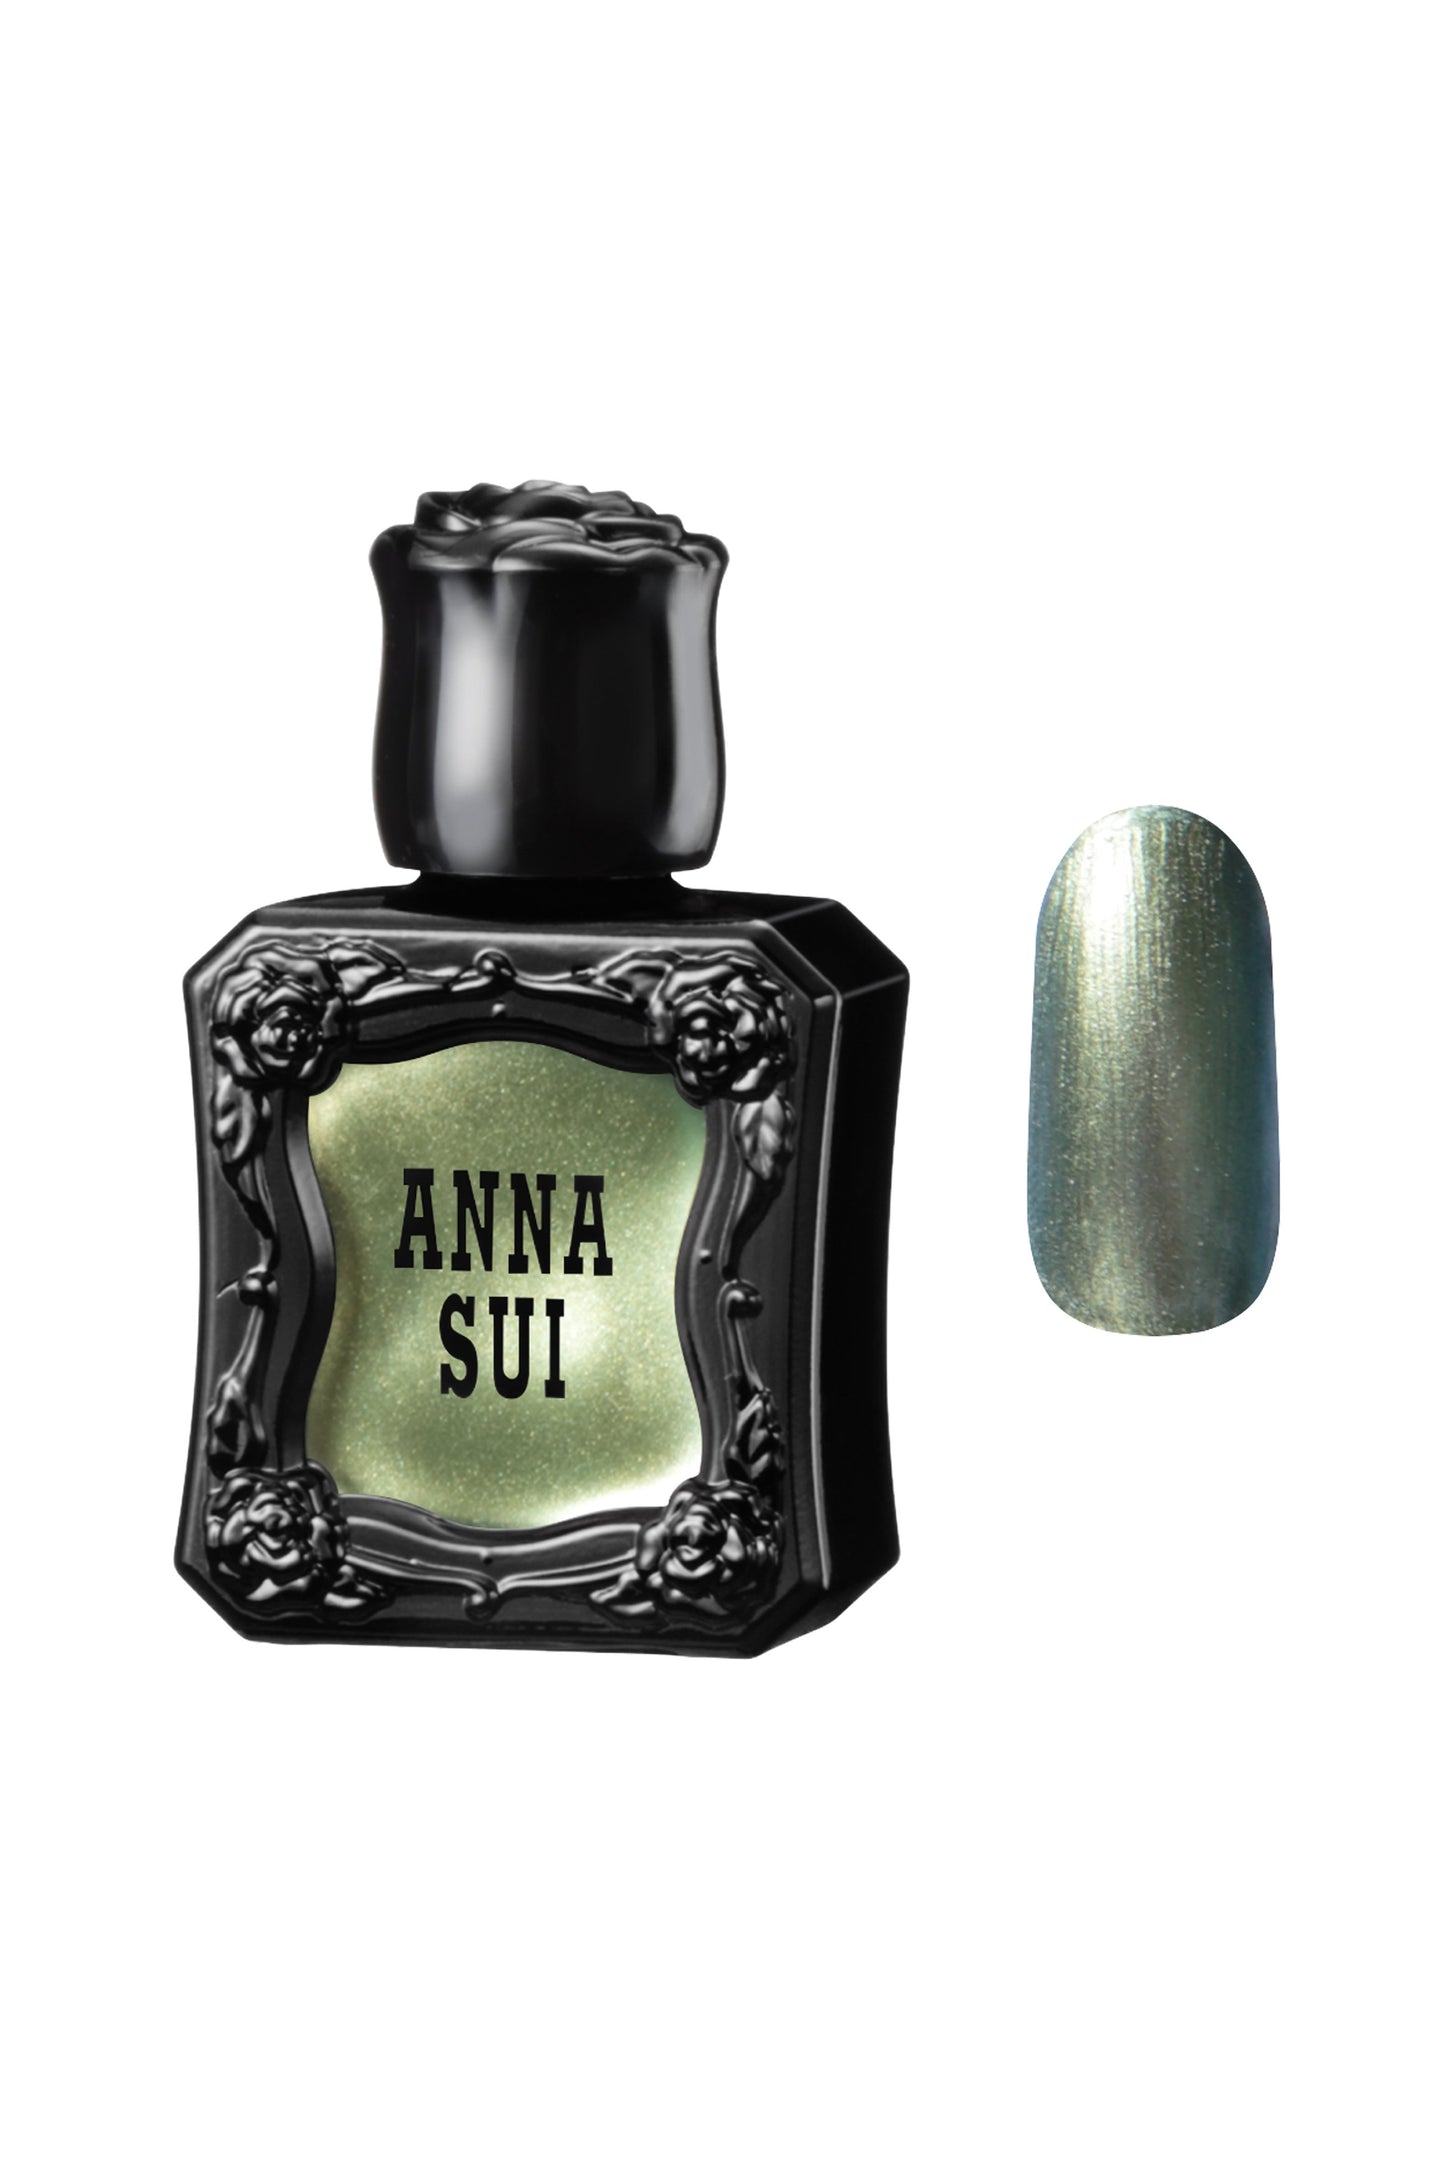 METALLIC PISTACHIO Nail Polish bottle raised rose pattern, black Anna Sui over nail colors in front